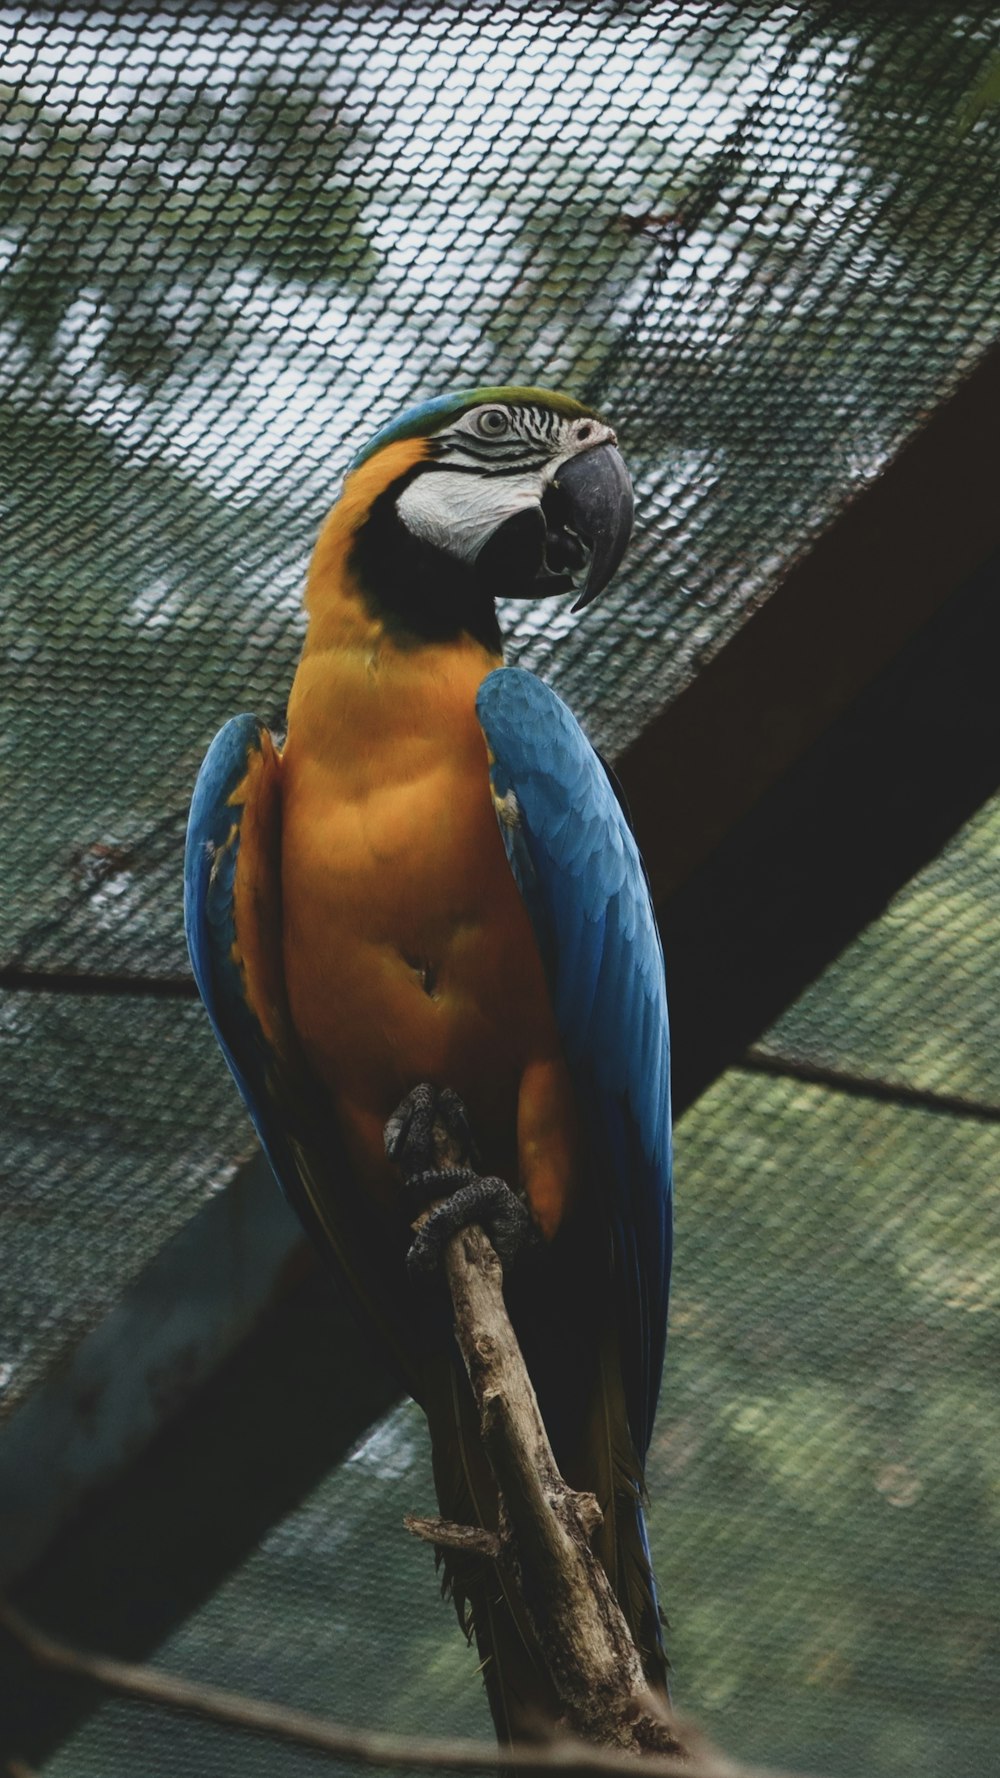 a blue and yellow parrot sitting on top of a tree branch